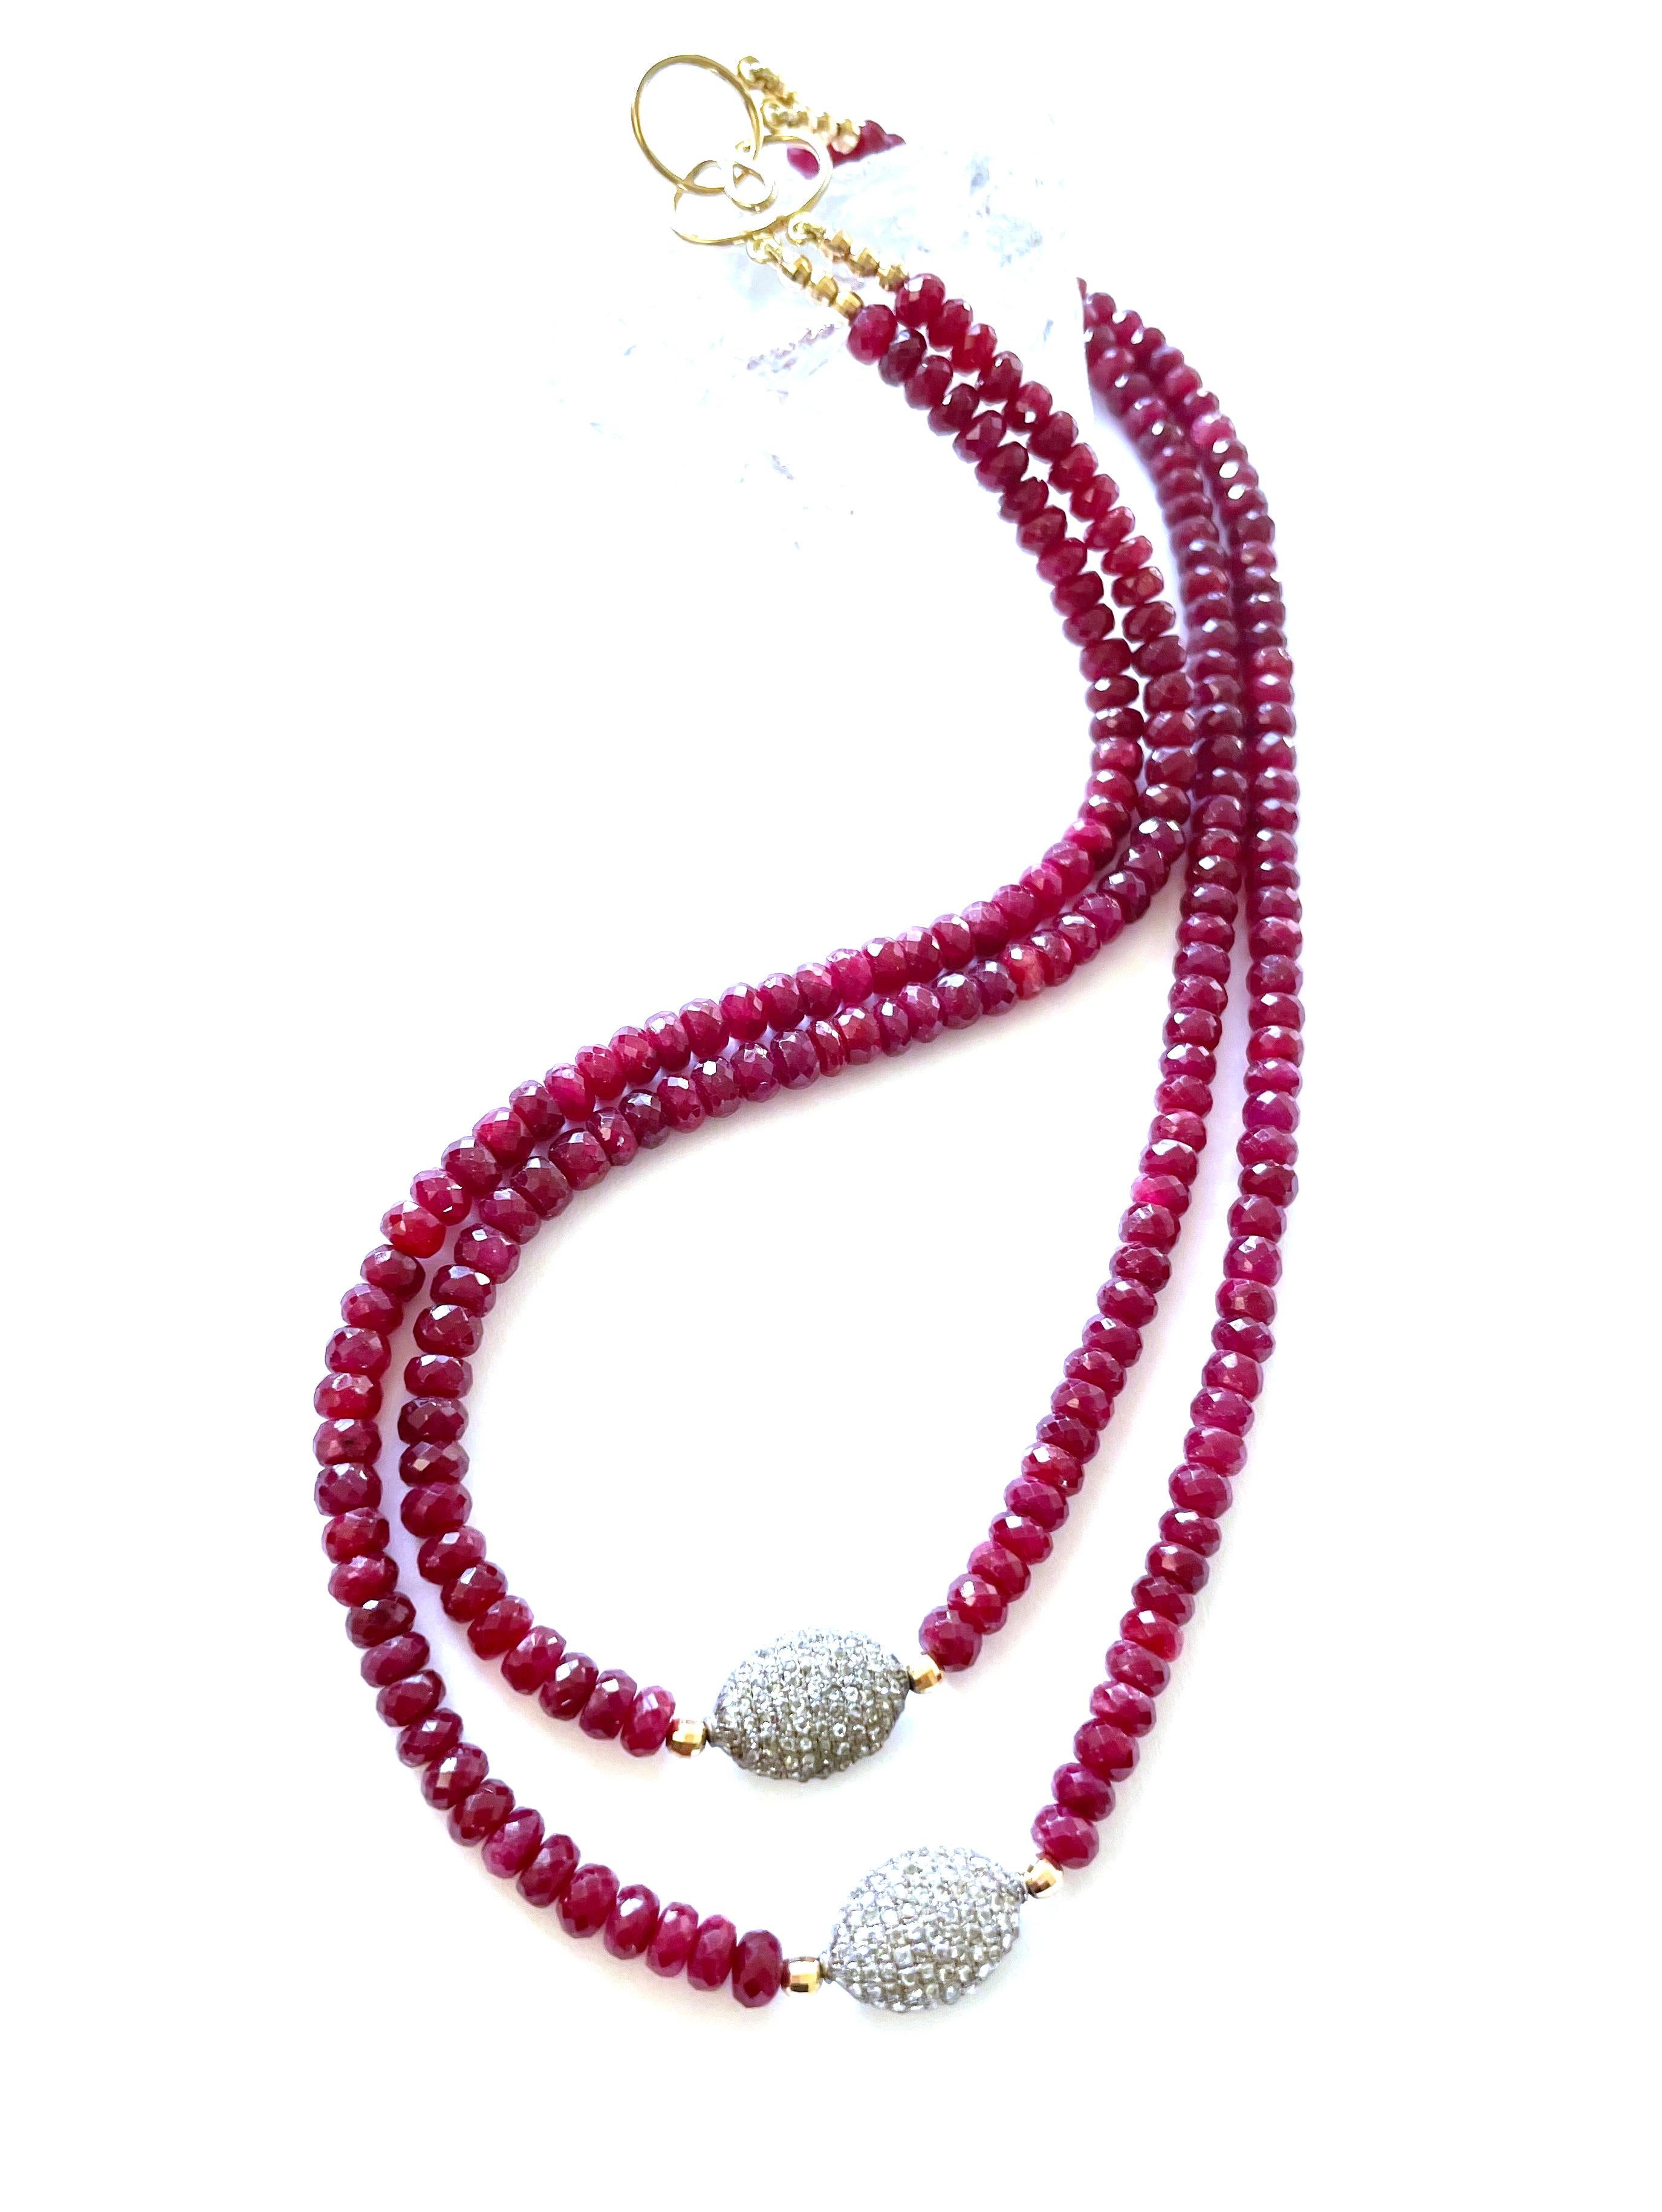 Description
Ruby, pave diamond accent beads, two strand necklace.
Item # N3753

Materials and Weight
Ruby, 5mm faceted rondelle beads, 65 carats.
Pave diamonds 10 x 15mm.
Rhodium sterling silver.
14k yellow gold.

Dimensions
Length 16-17.75